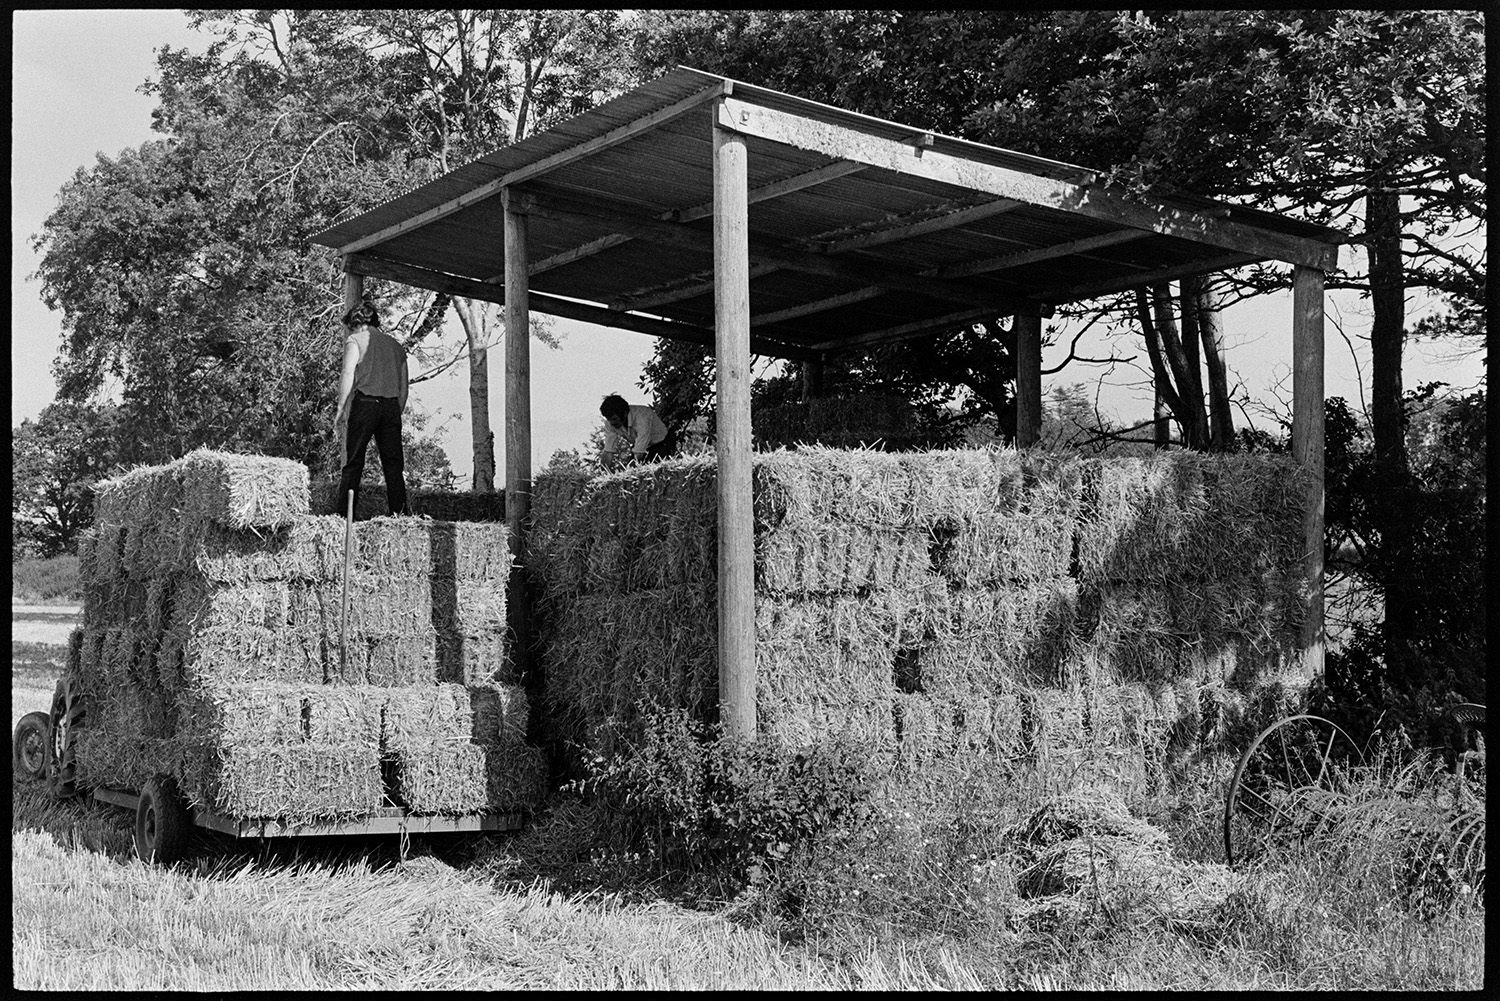 Haymaking, putting hay in barn. 
[Two men unloading hay bales from a trailer into a barn with open sides and a corrugated iron roof, in a field at Dowland. Trees can be seen behind the barn.]